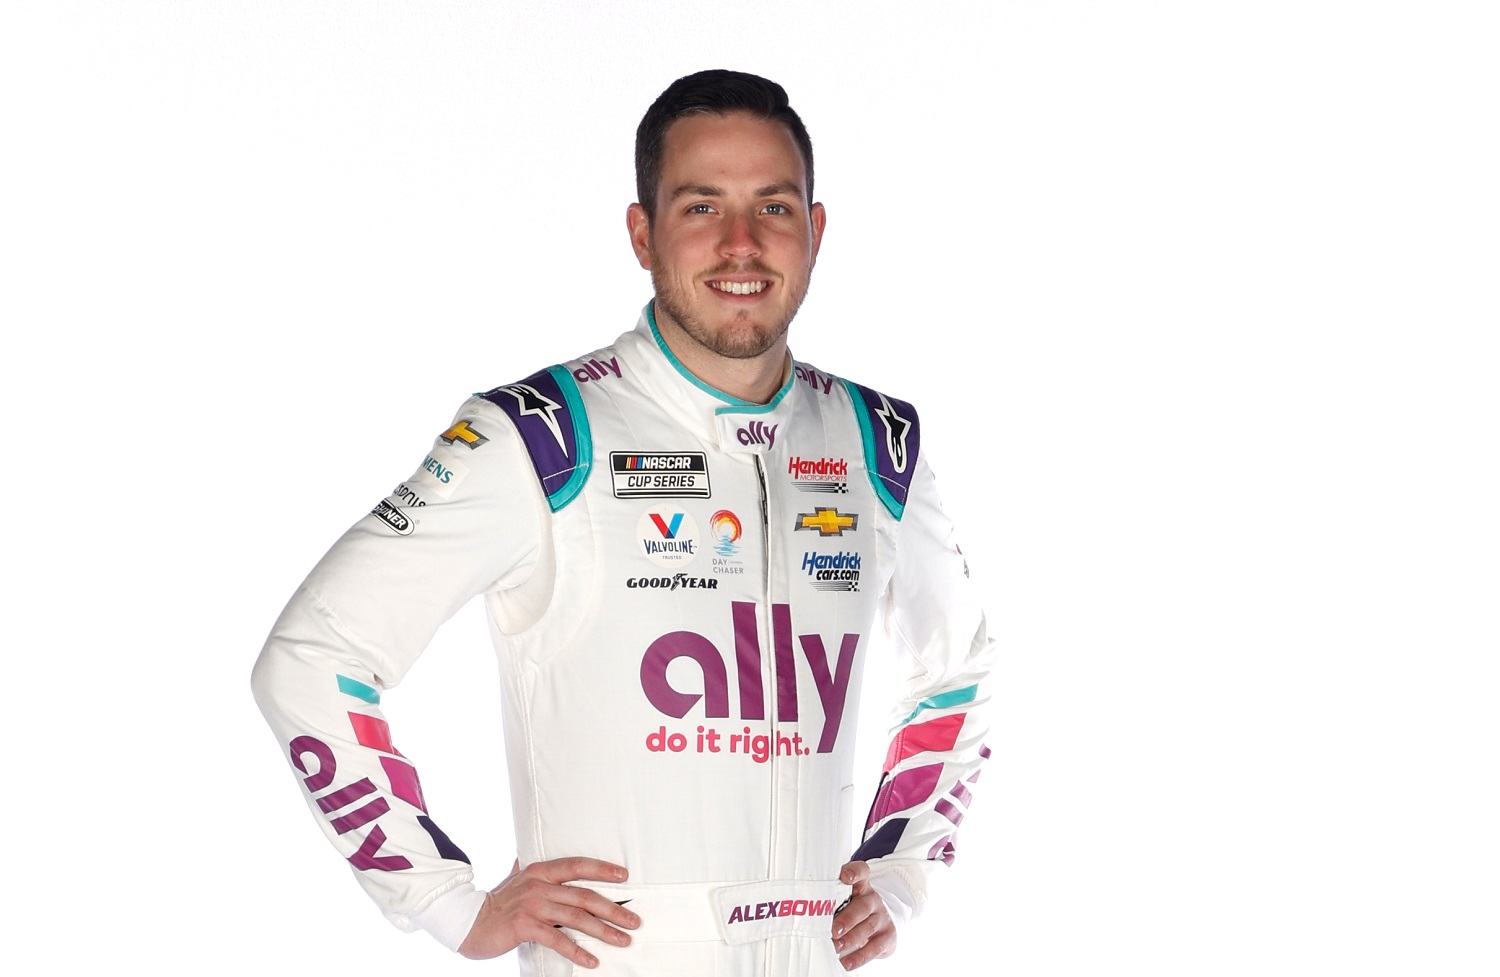 NASCAR driver Alex Bowman poses for a photo during NASCAR Production Days on Jan. 18, 2022, in Concord, North Carolina.